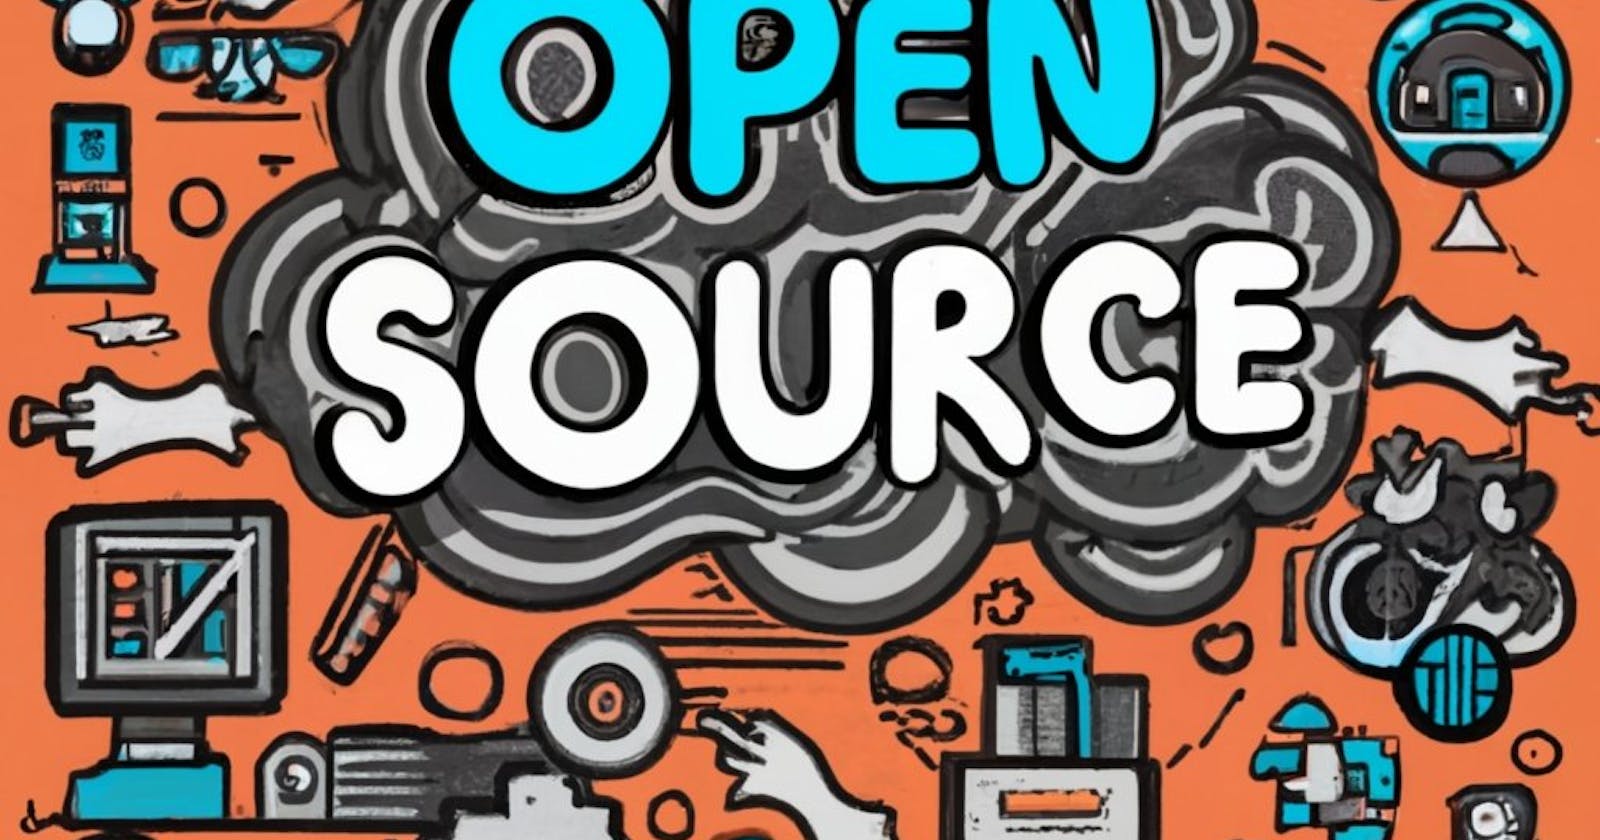 A Beginner's Guide to Contributing to Open Source as a Web Developer